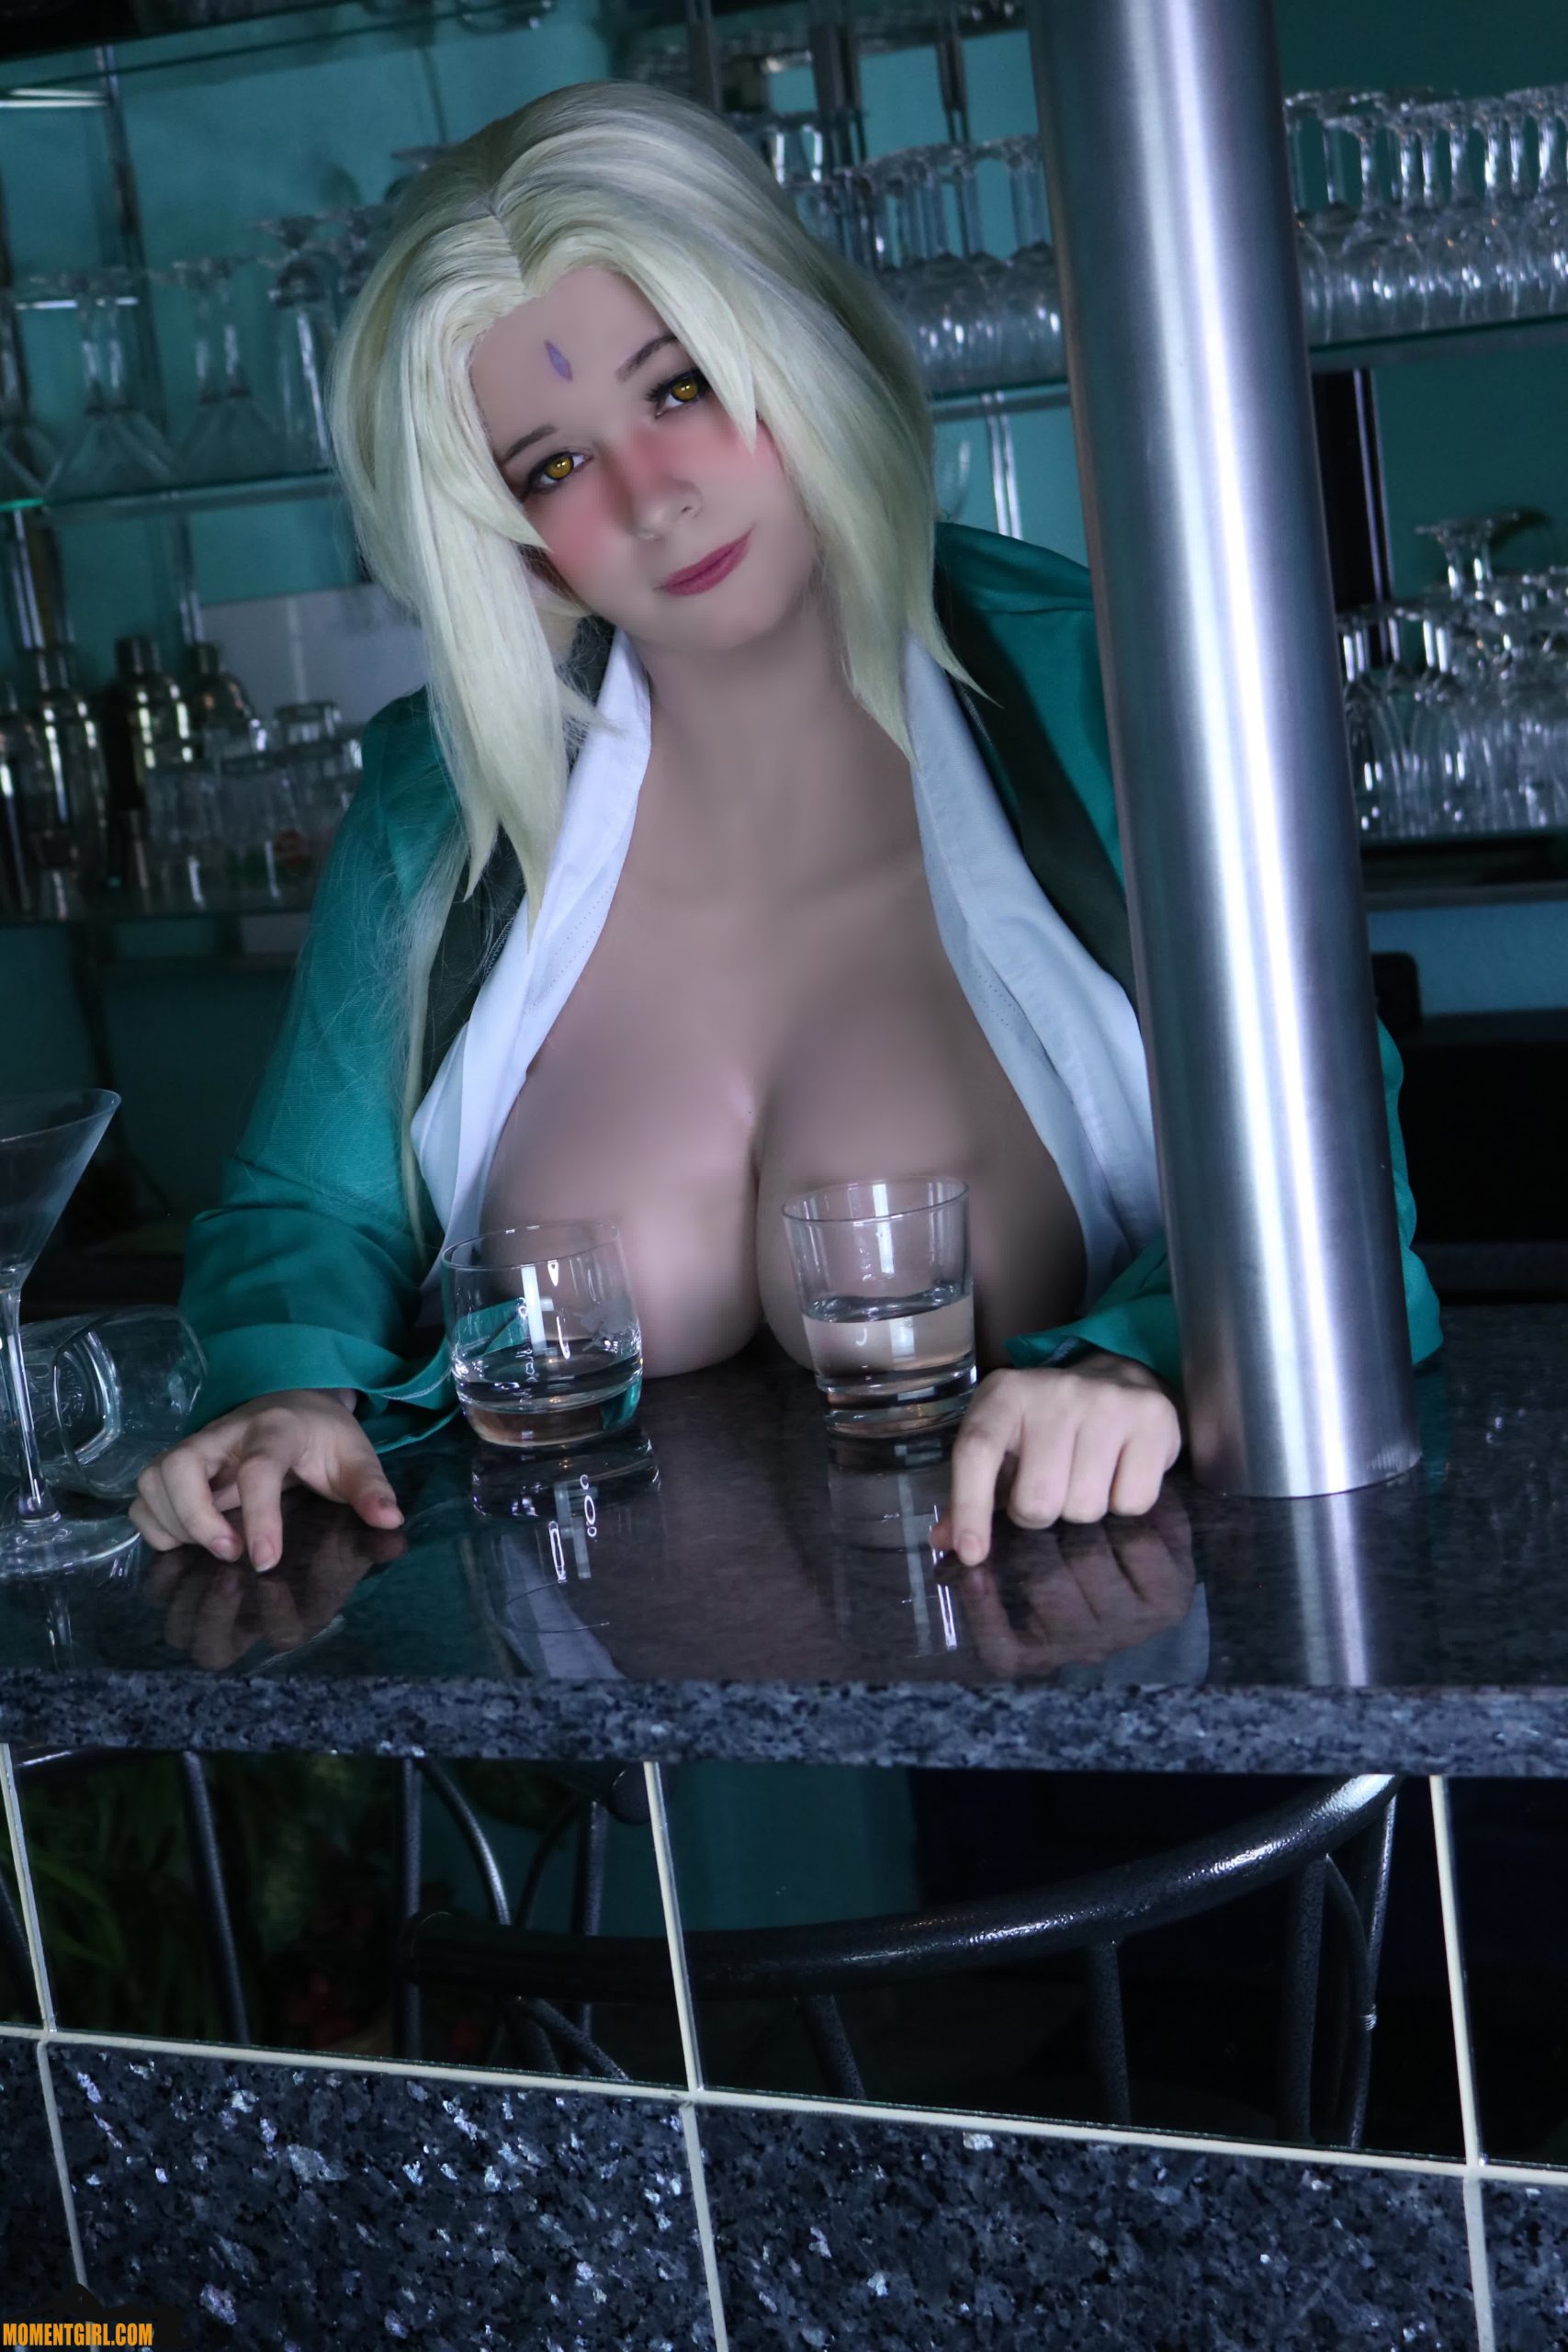 Self Tsunade Naruto By Lysande. I’m Looking For A Partner, Follow The Instructions On Momentgirl.com To Contact Me!